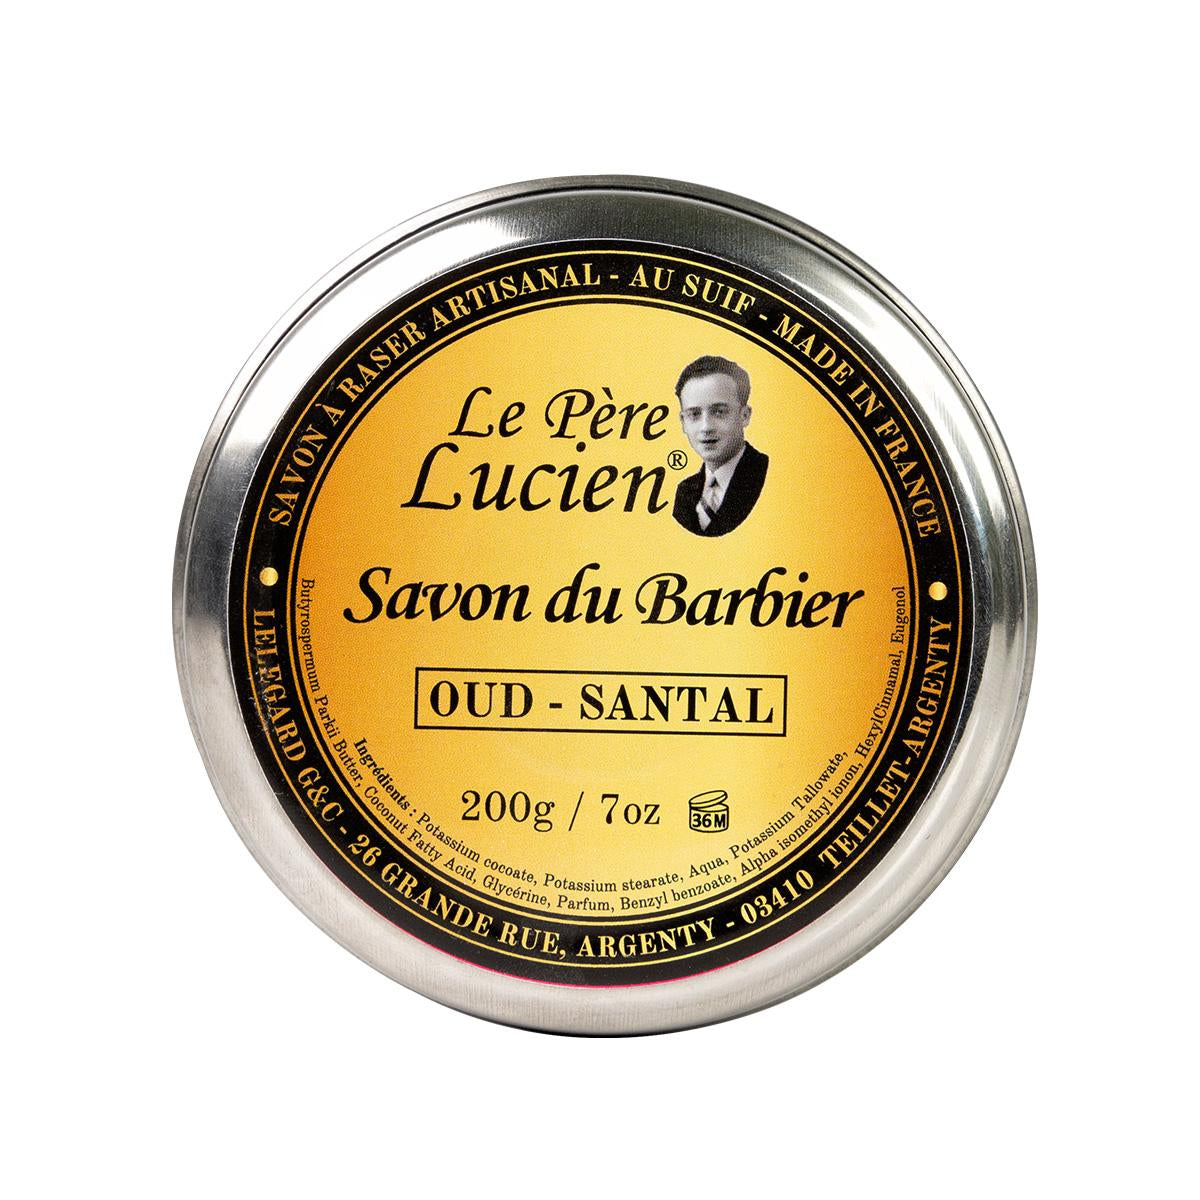 Primary image of Oud-Santal Shaving Soap